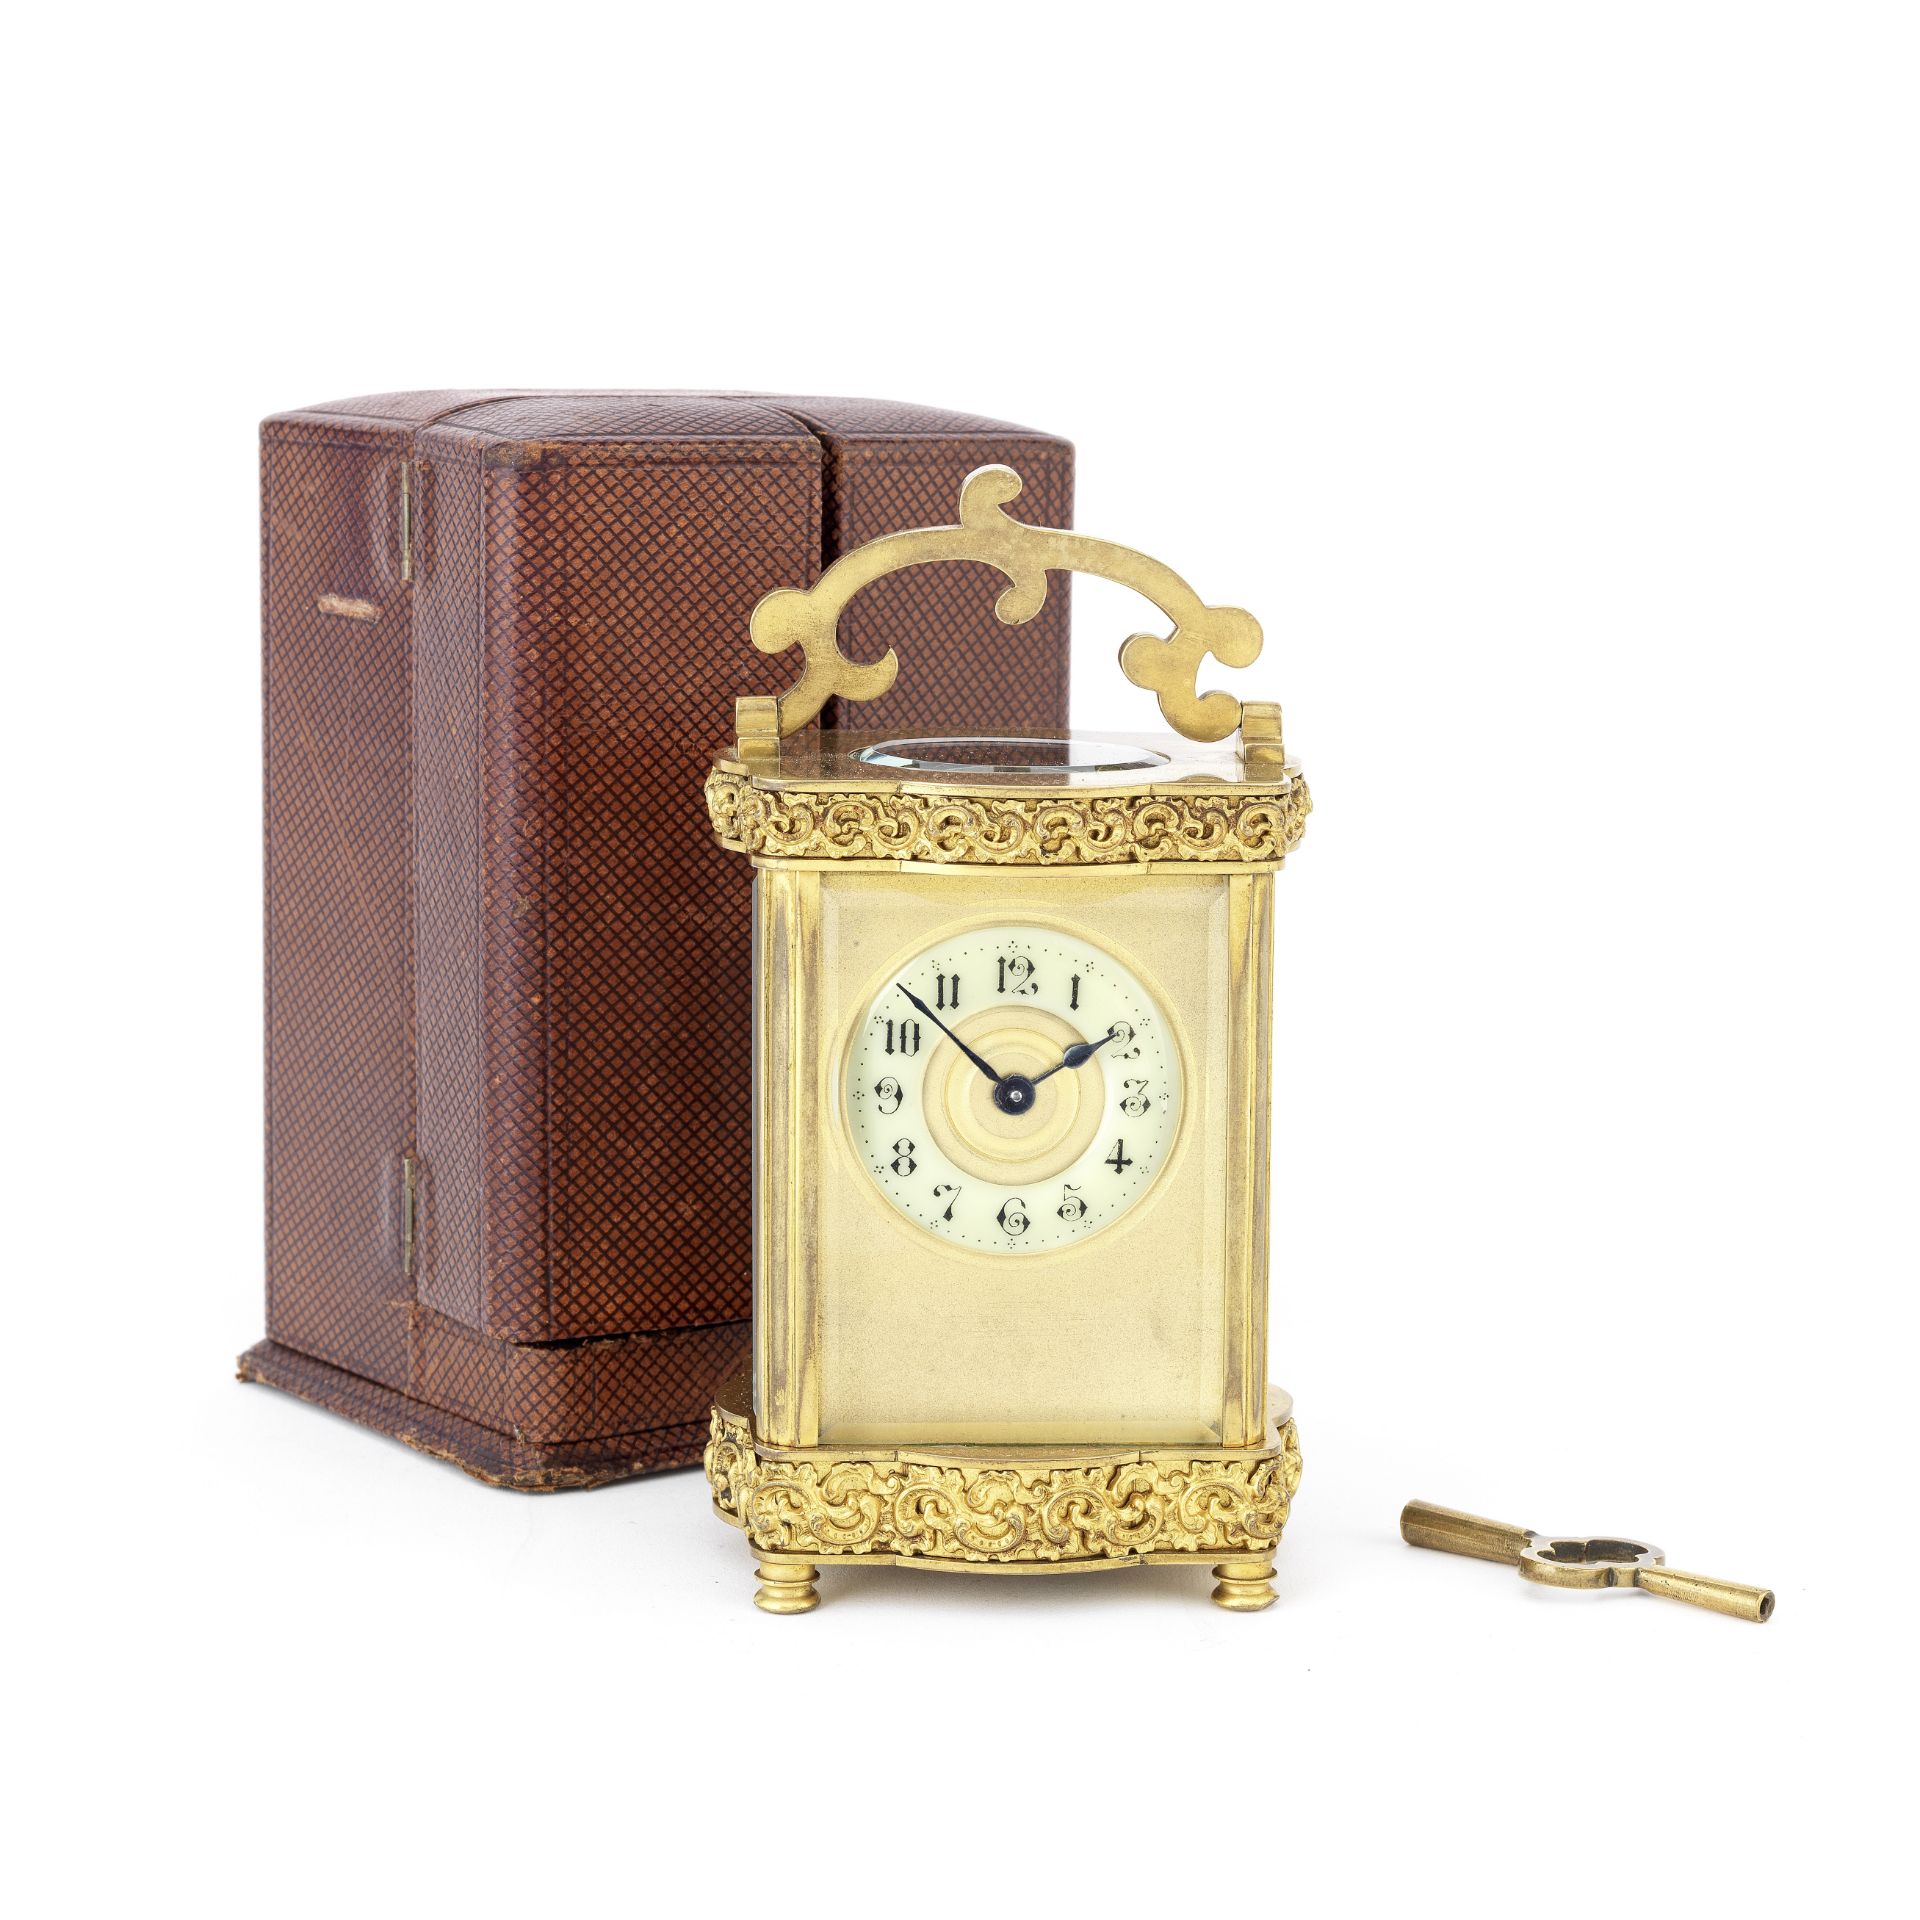 A late 19th century French lacquered brass carriage timepiece in original silk-and vevet-lined tr...